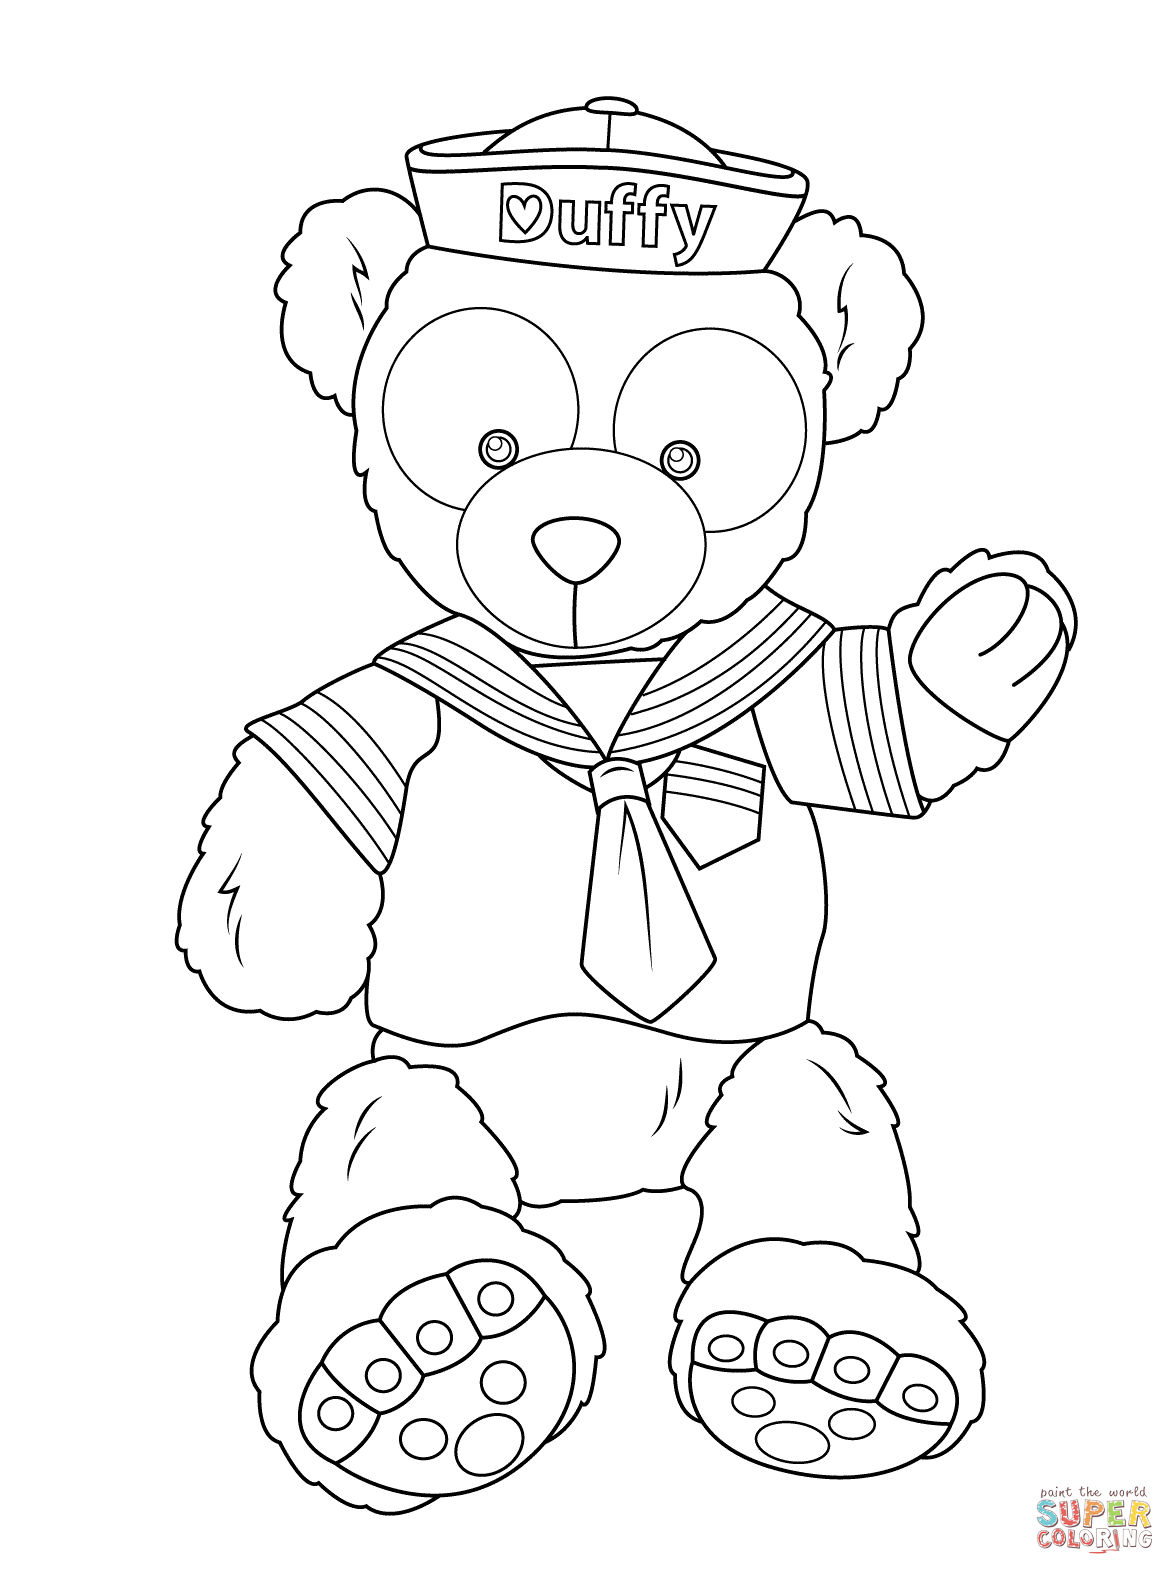 Duffy The Disney Bear Coloring page | Free Printable Coloring Pages